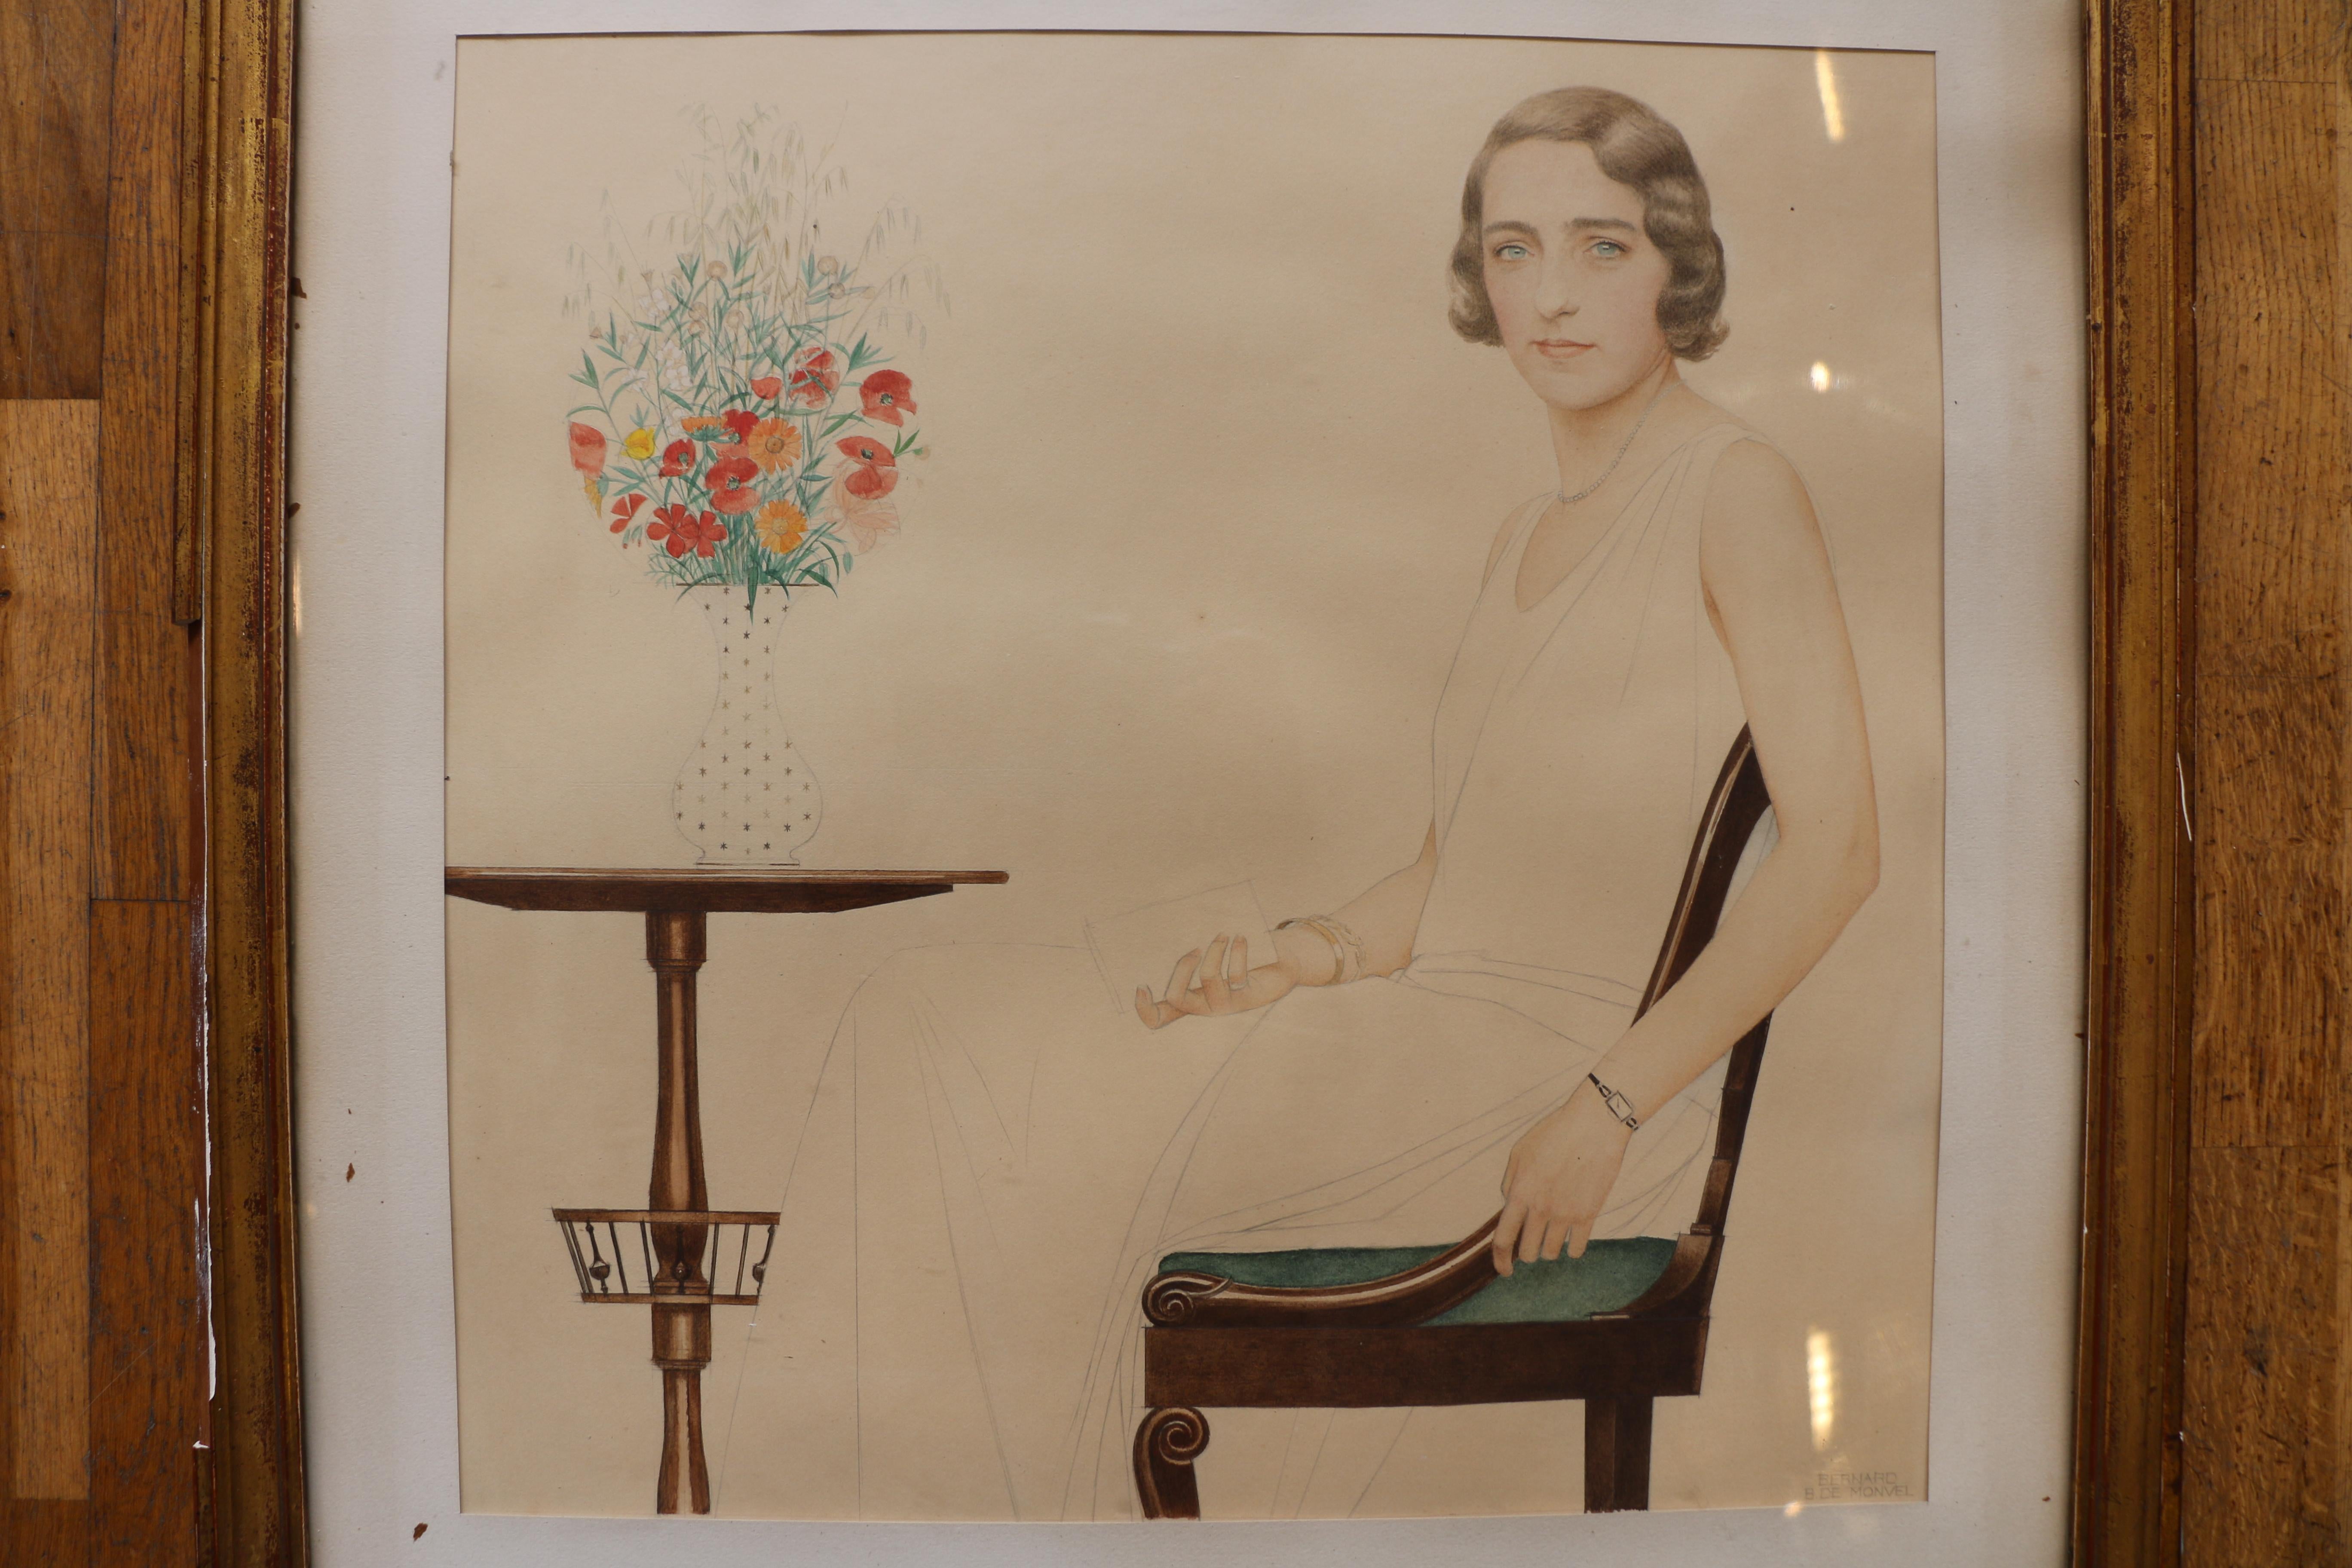 Exceptional watercolor by renowned painter Bernard Boutet de Montvel (1881-1949). Watercolor and black pencil on thick paper. Signed bottom right. With its original frame (in poor condition). The painting is the portrait of Ms Lise Brissaud whose